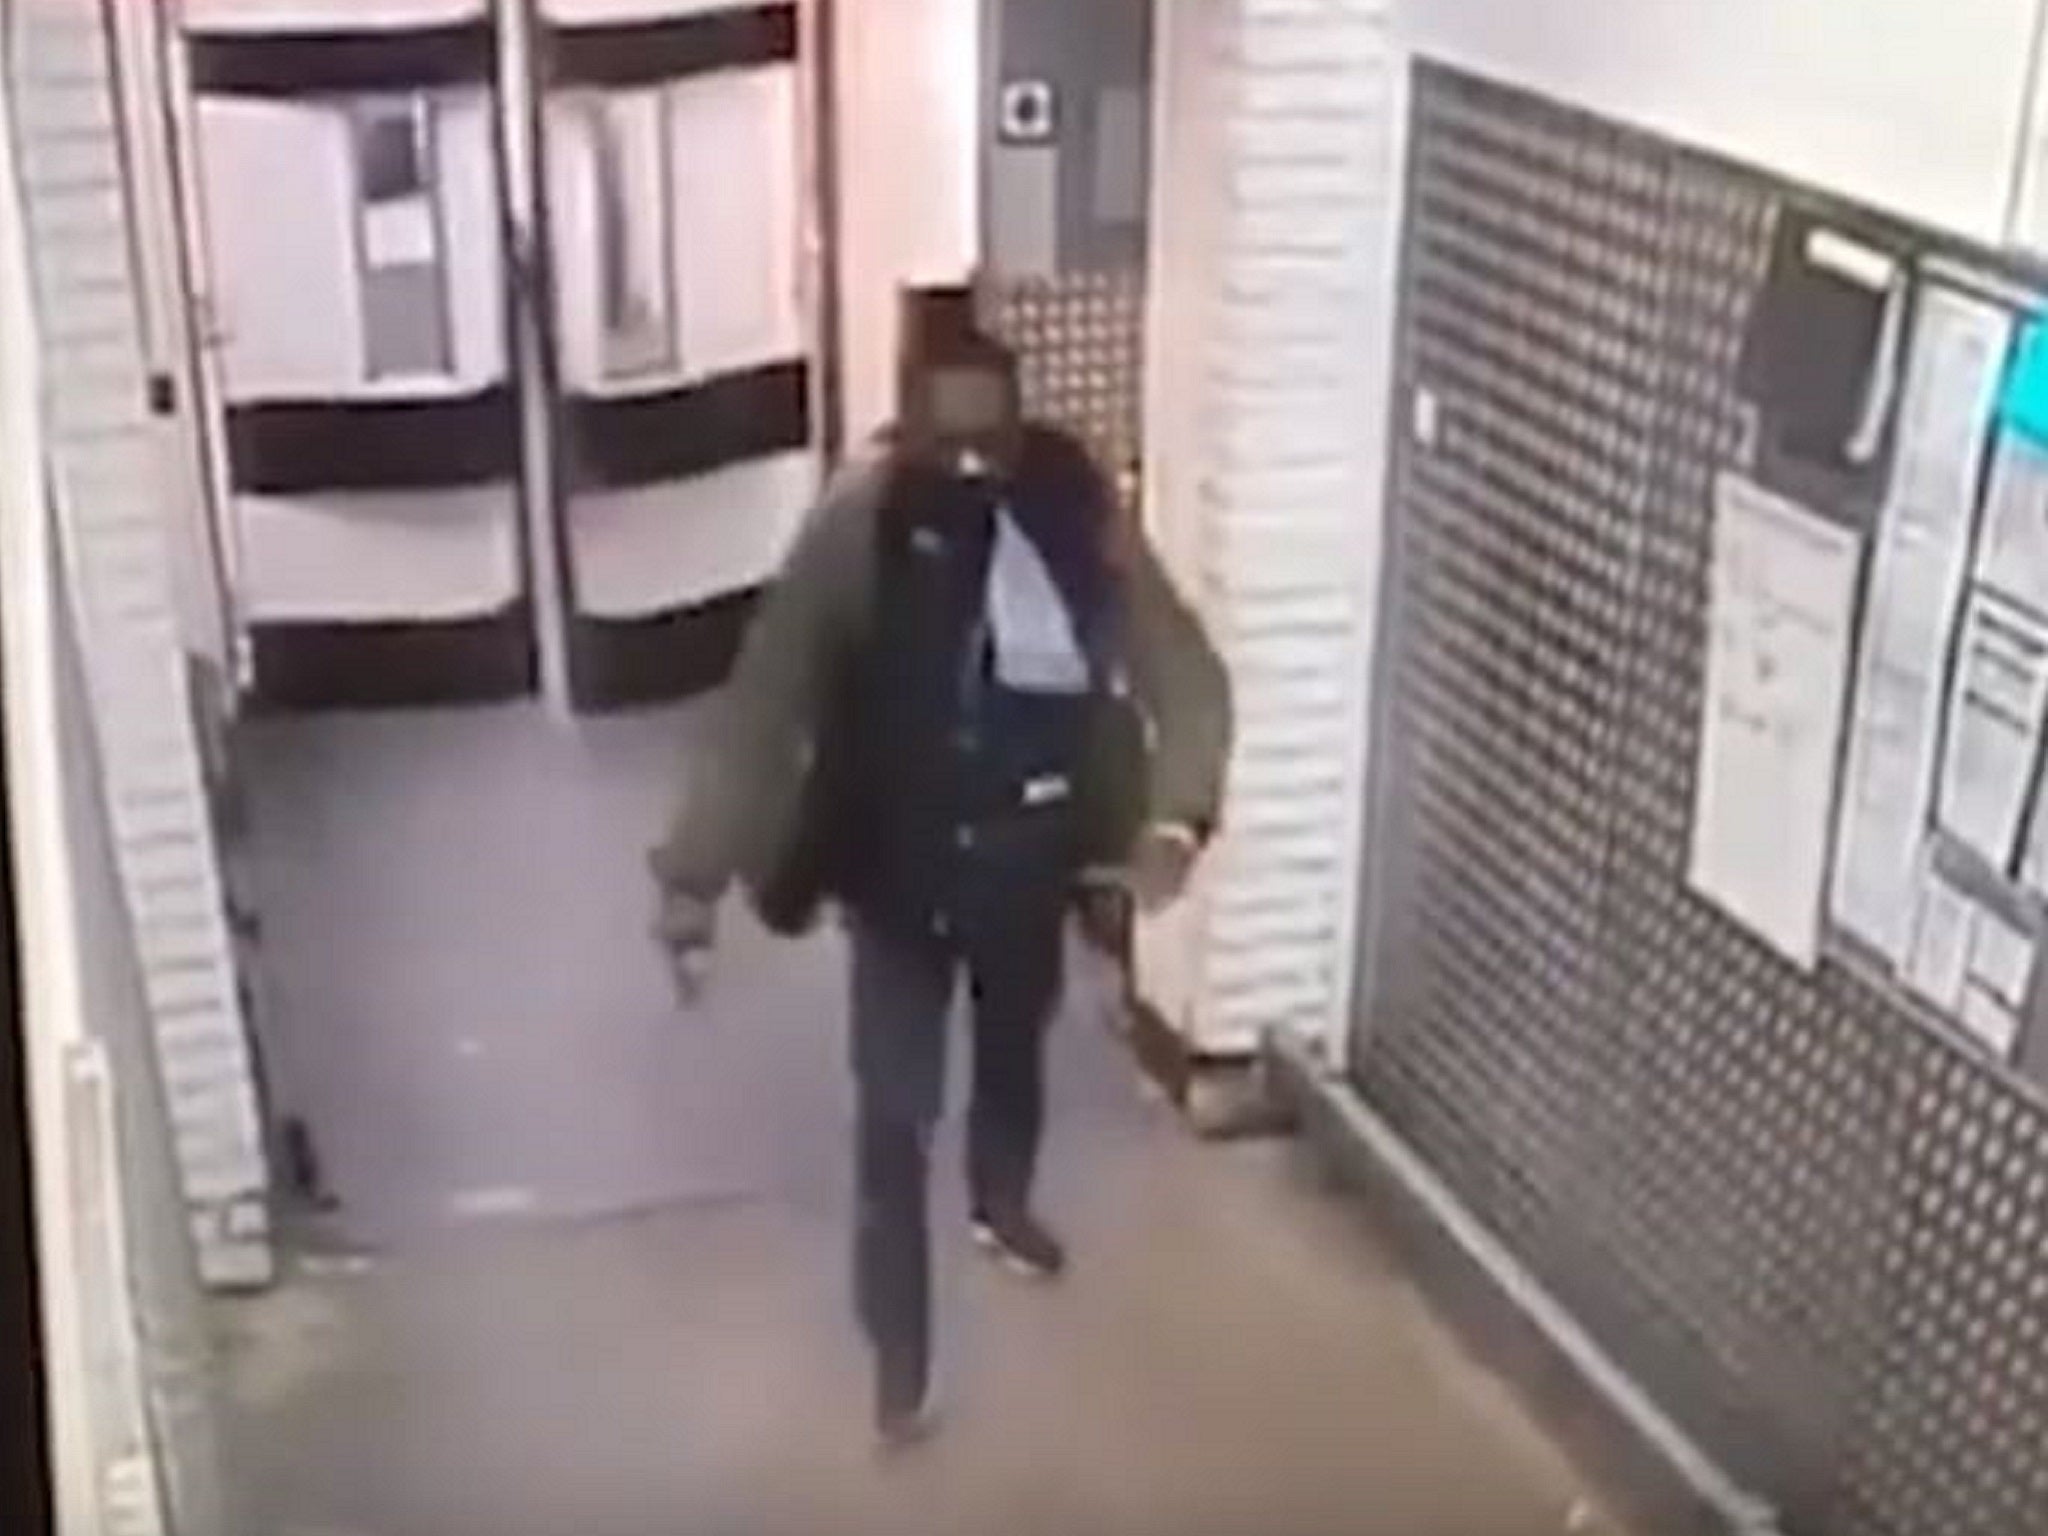 CCTV footage captured the moment a man wielding an axe chased customers through a Tesco store in Purley, Croydon, south London, on 23 January, 2019.